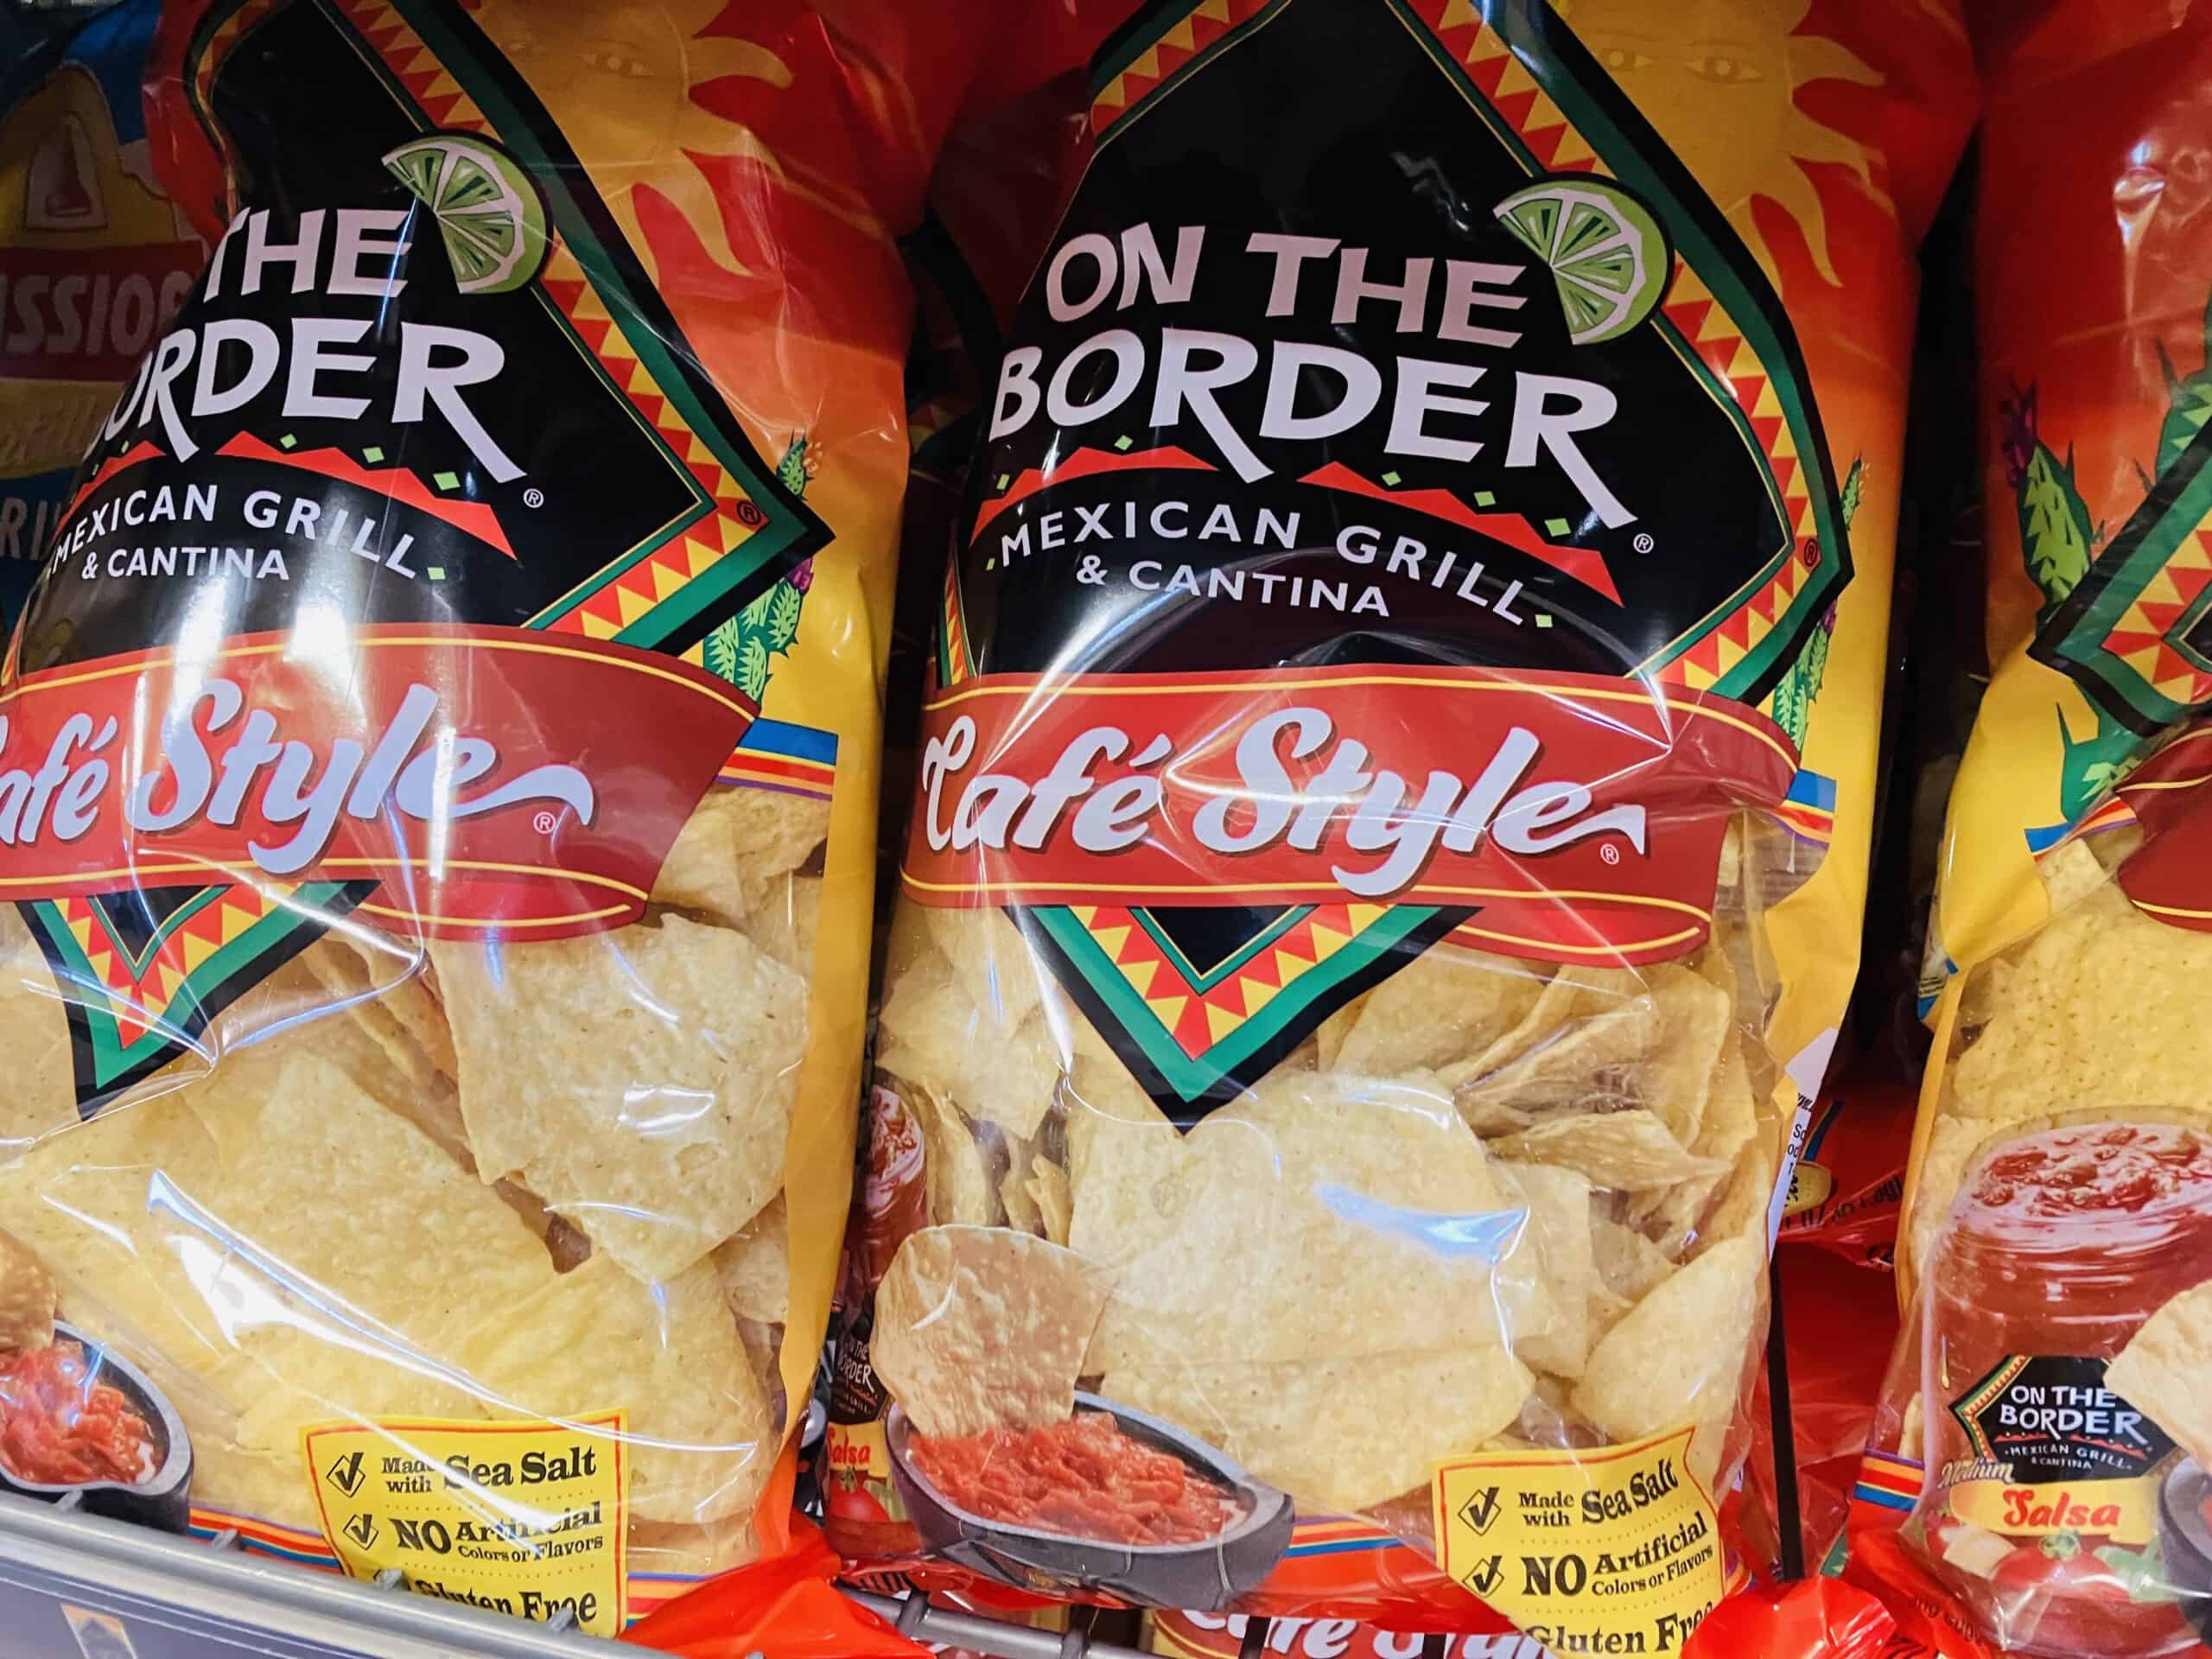 On The Border Cafe Style tortilla chips